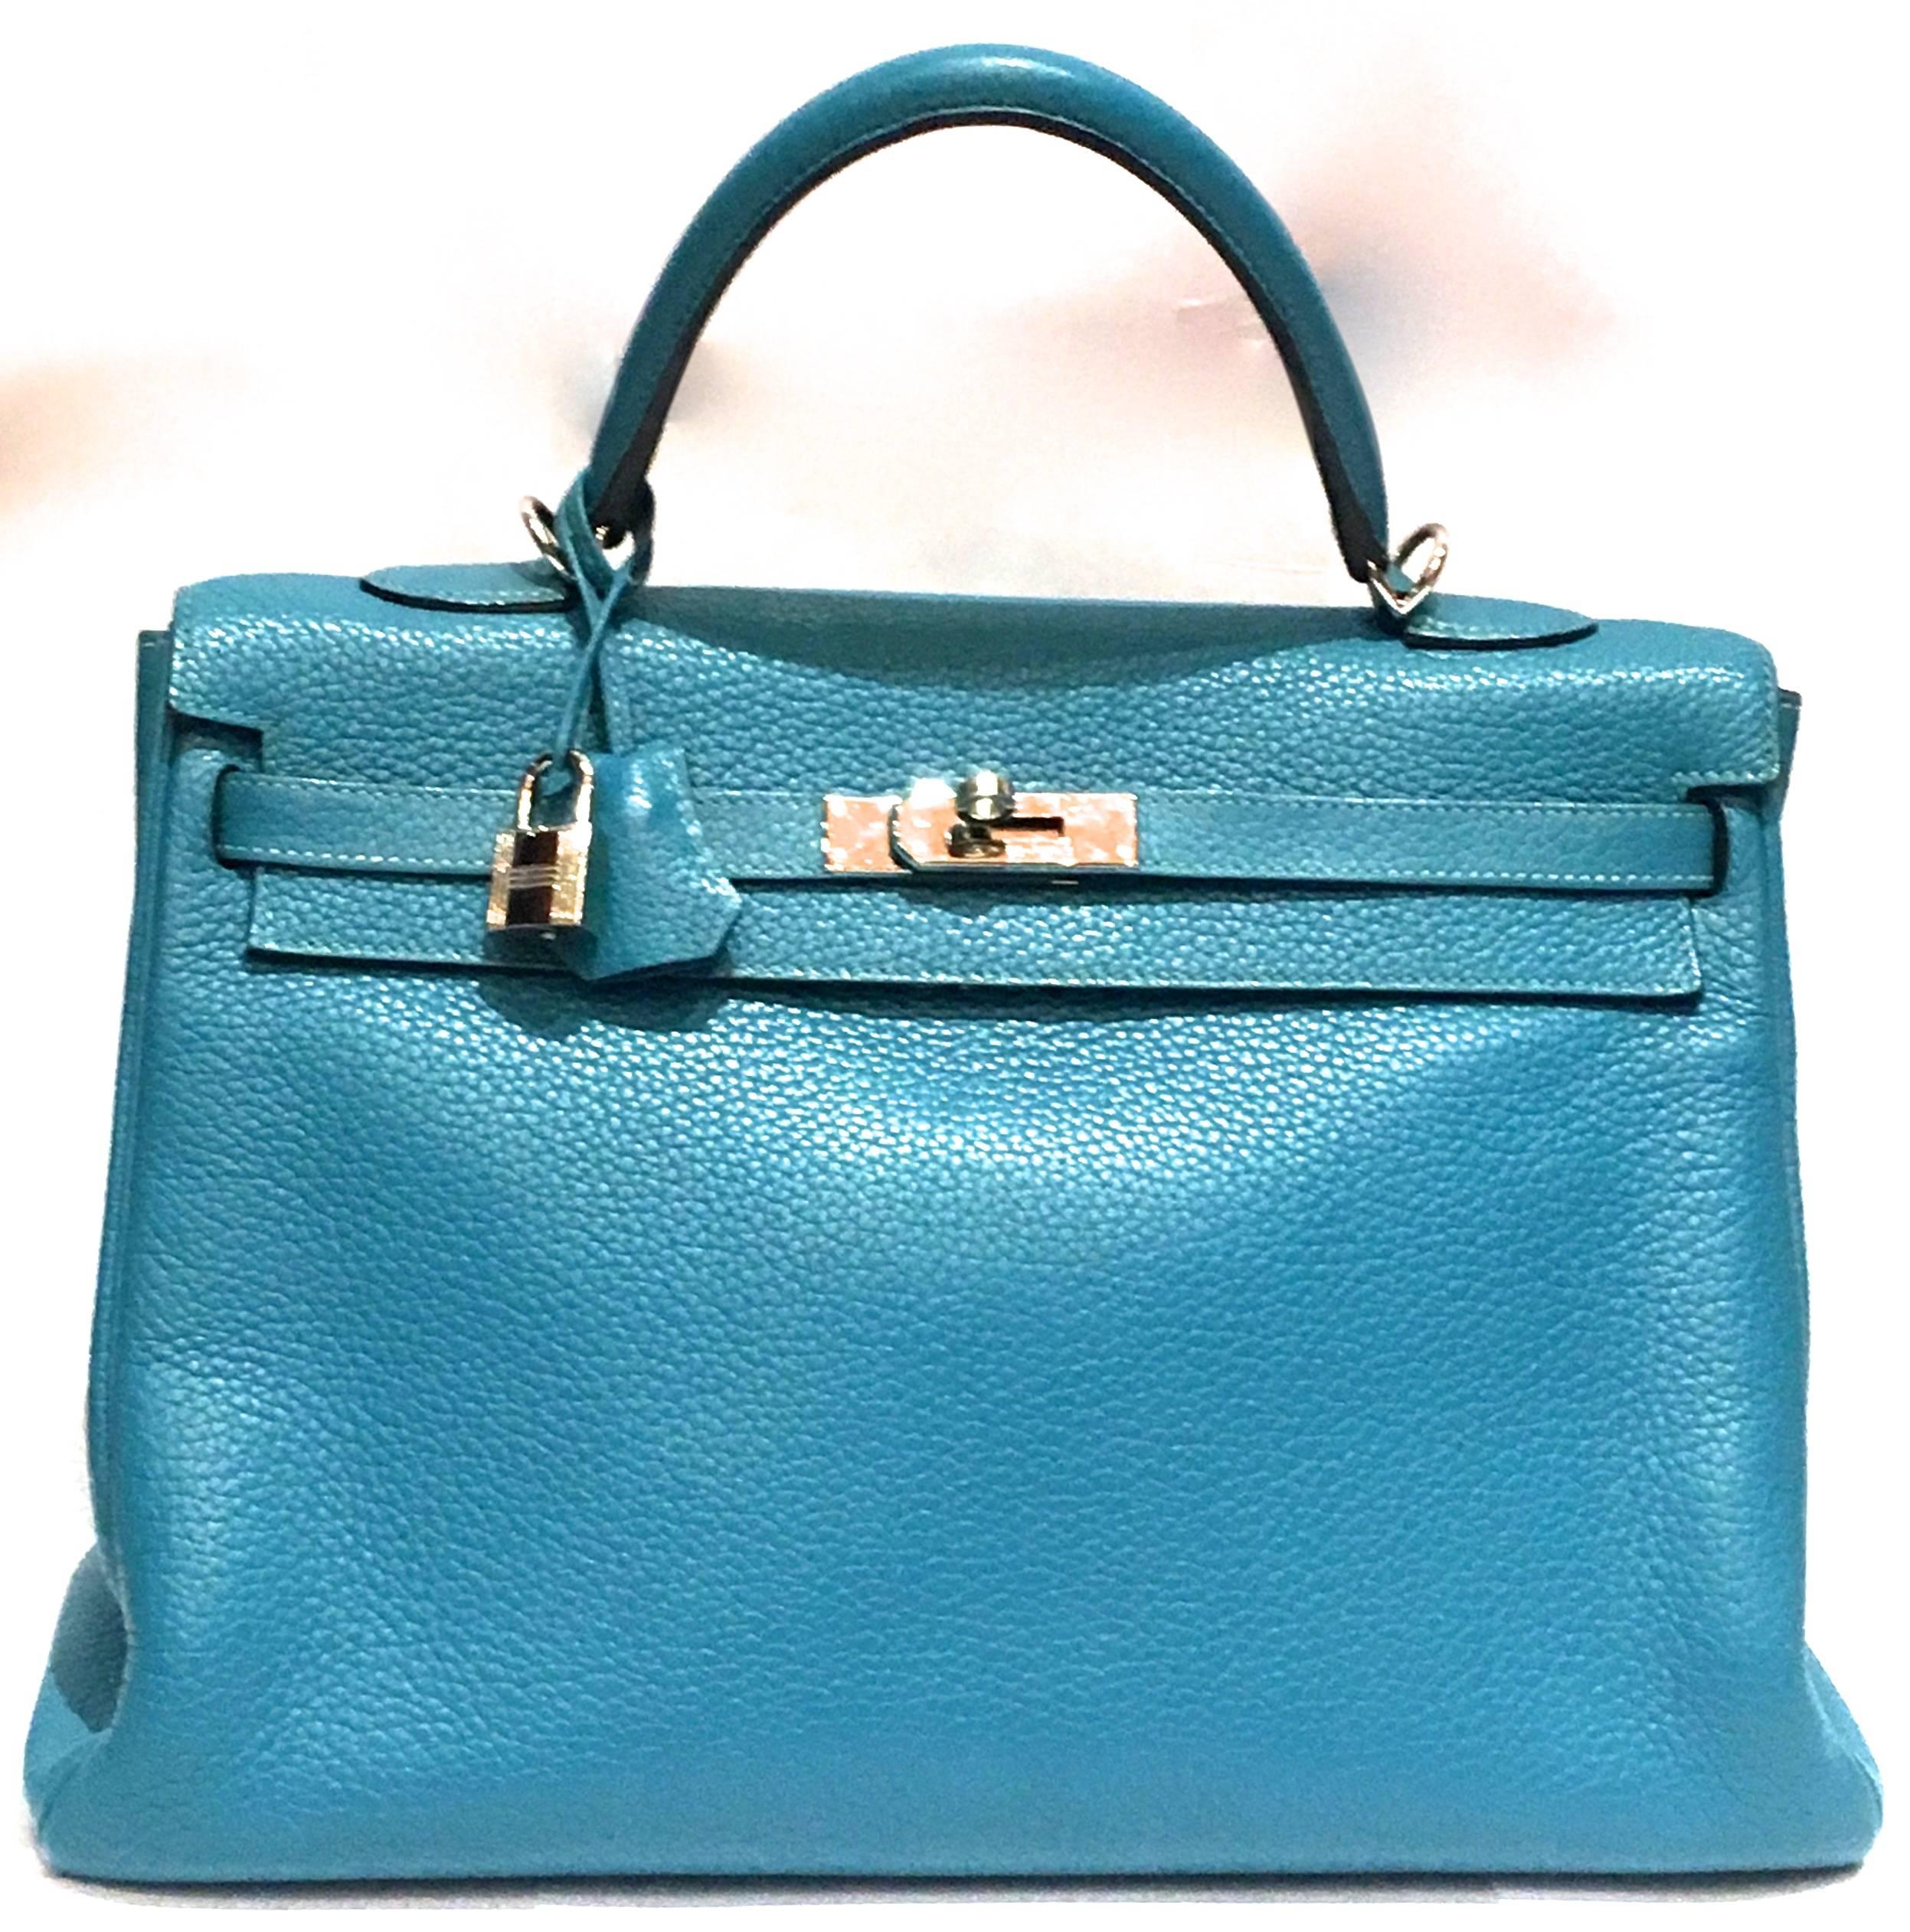 Presented here is a gorgeous handbag from Hermes Paris. This gorgeous handbag is the classic 'Kelly' styling which was made famous because Grace Kelly was known for the style being her favorite. This particular bag is made with clemence style